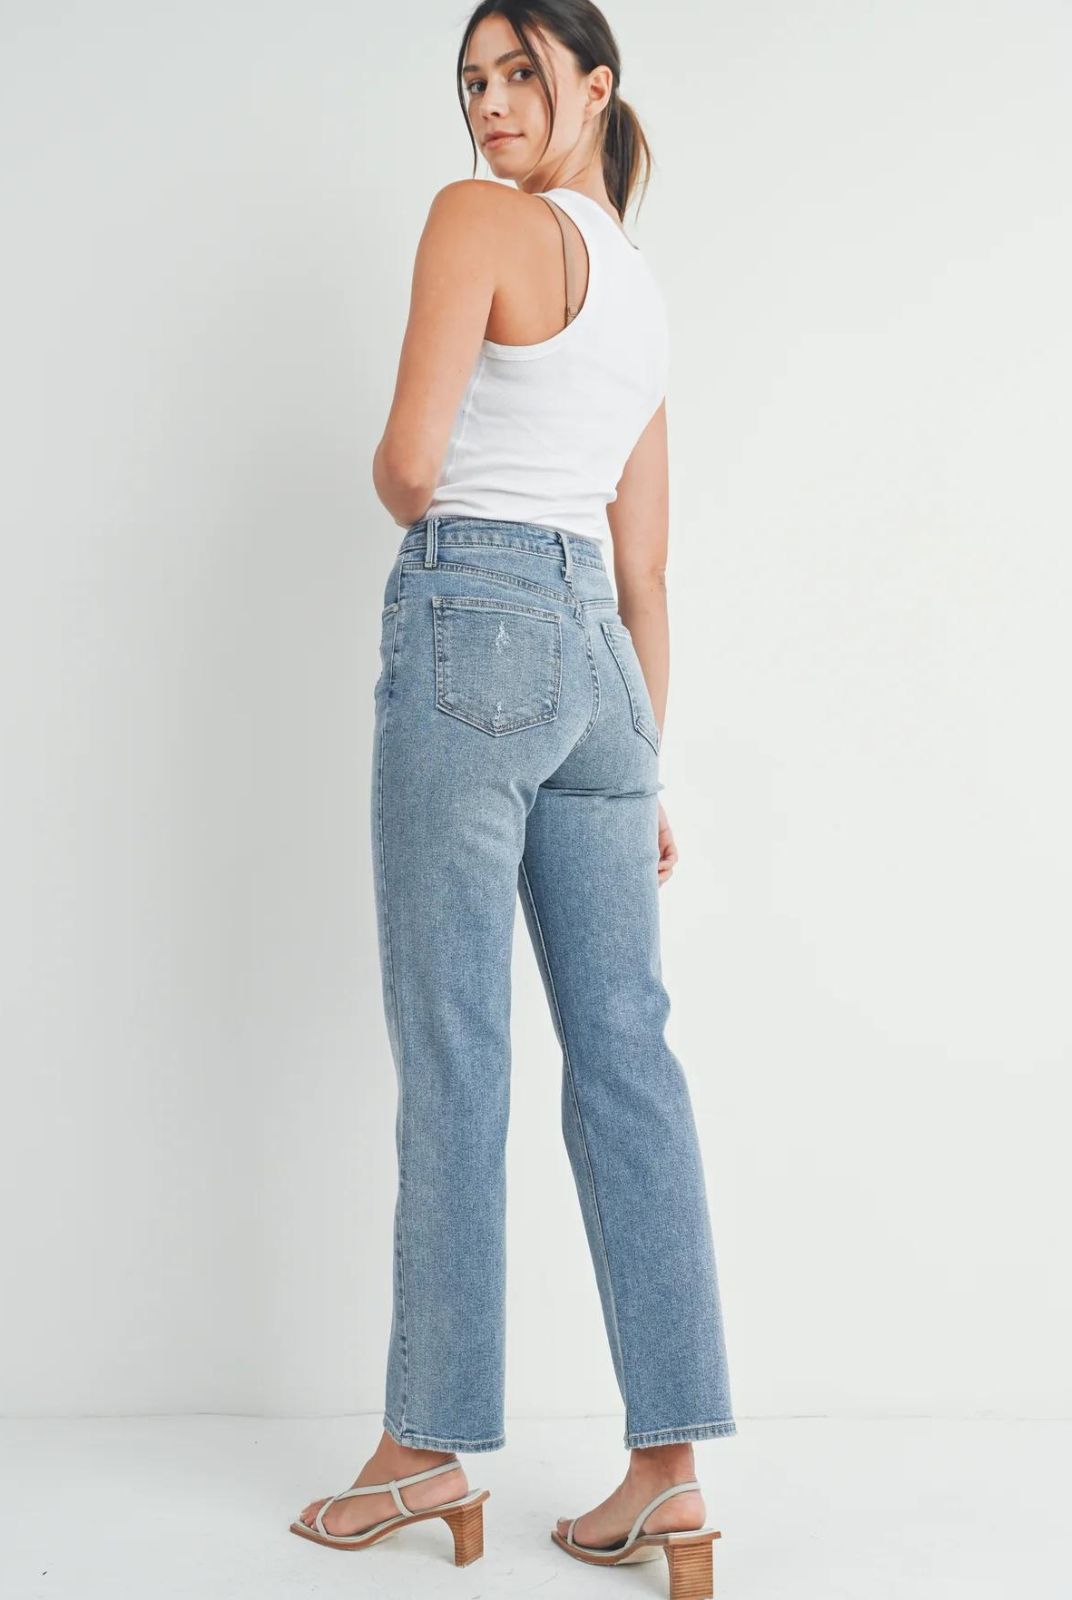 Just Black Denim The Everything Straight Jean.A high-waisted, medium rinse straight jean that’s everything you need for fall. Keep it casual with sneakers or dress it up with heels for an on-trend outfit every time.